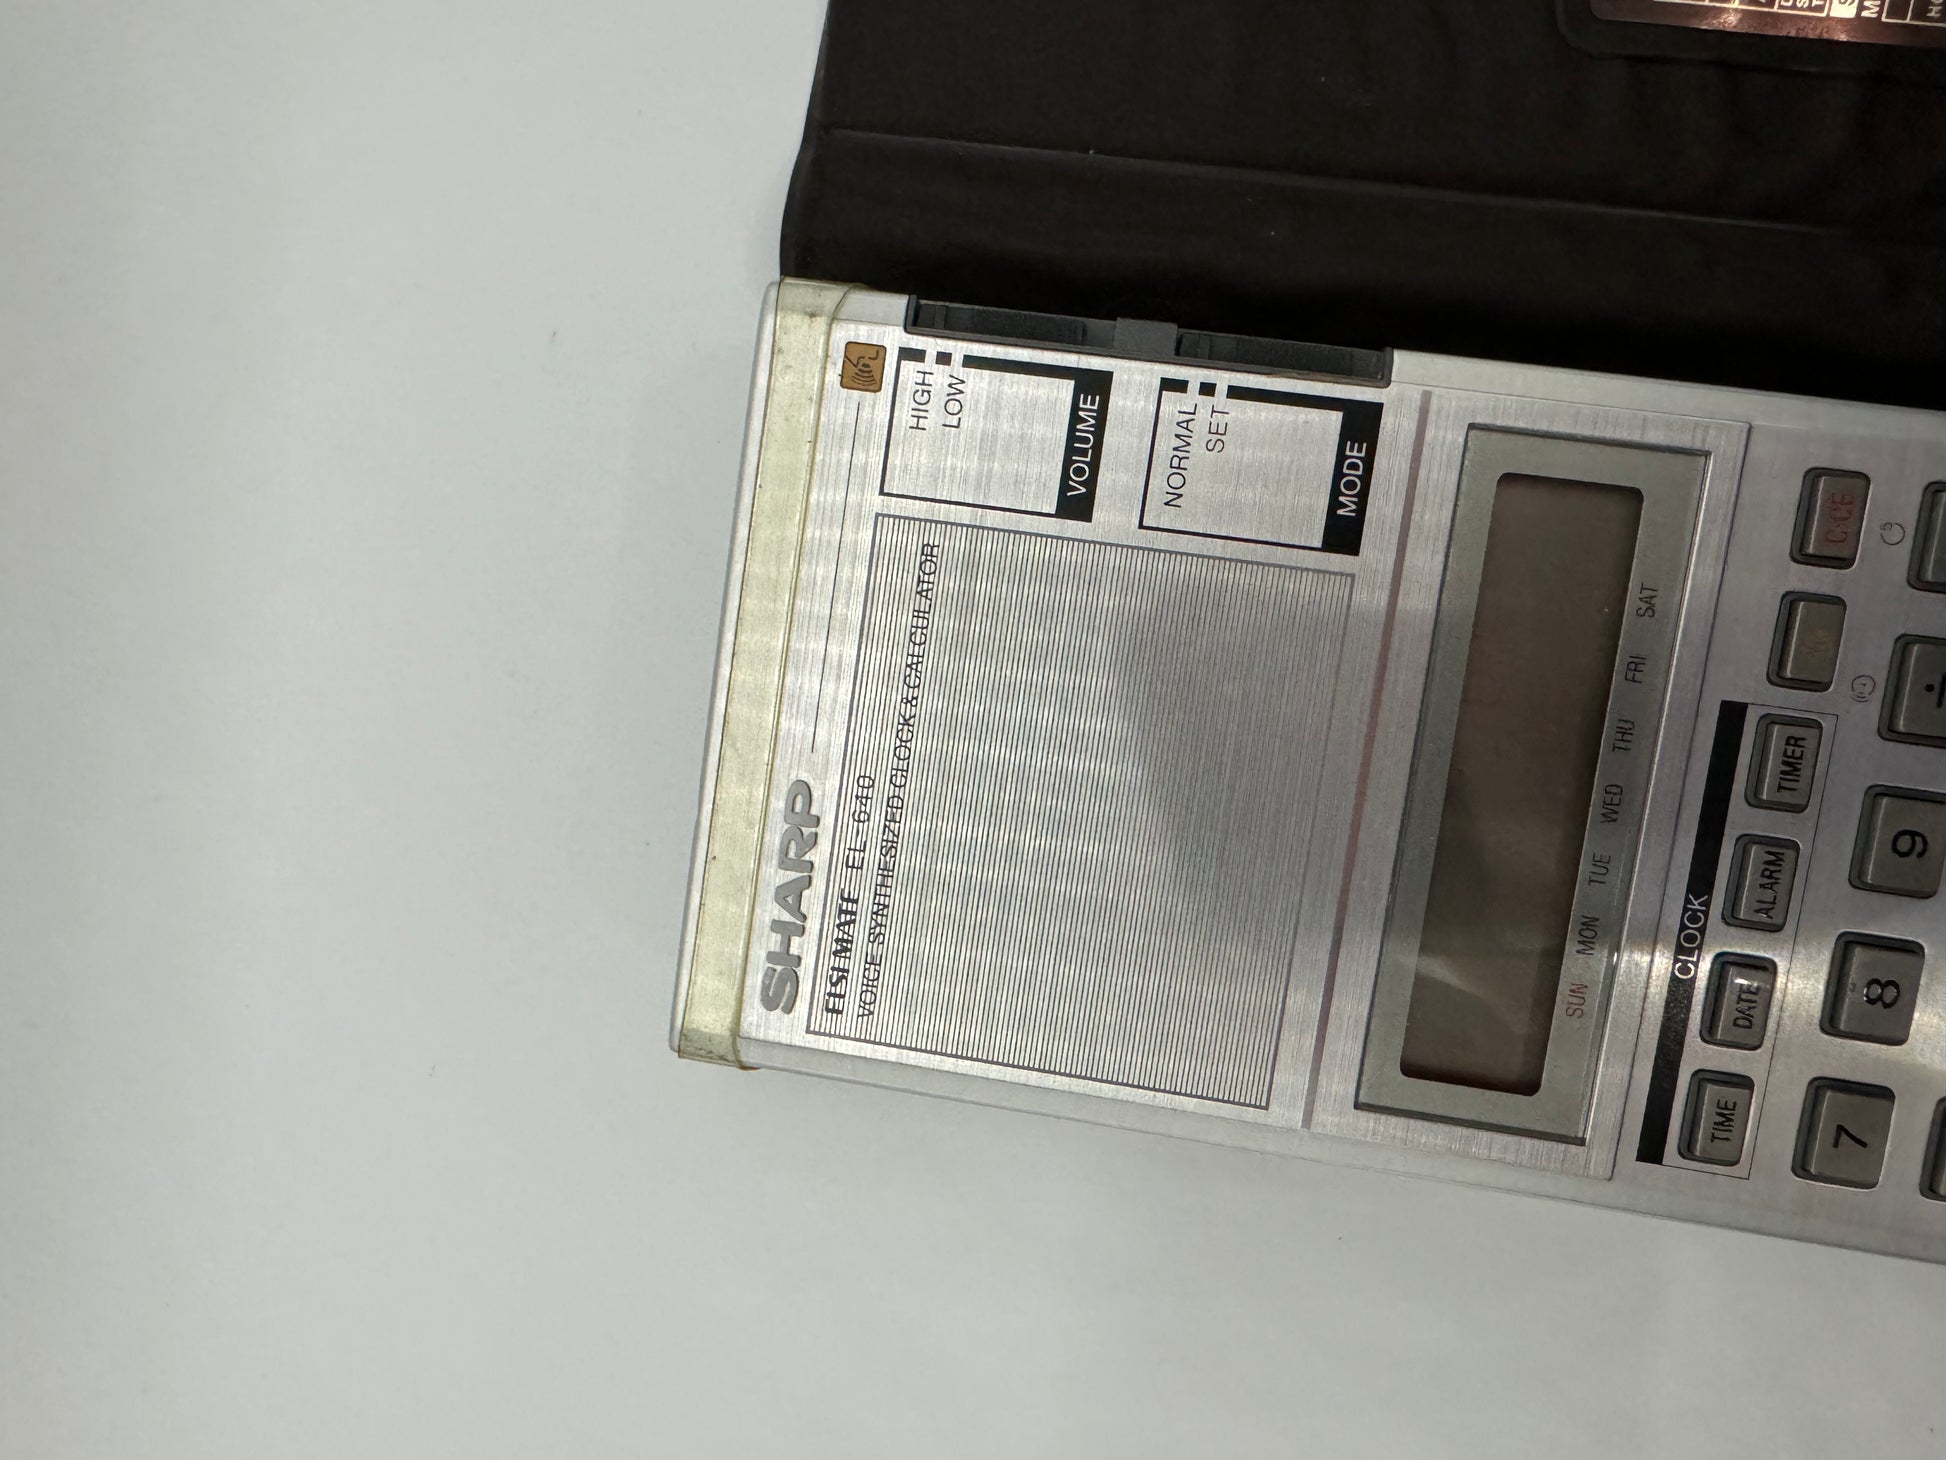 The picture shows a portion of a Sharp electronic device, possibly a calculator or a radio. The device is silver in color. On the left side of the image, there is a black object partially visible. The device has a rectangular screen which is blank. Below the screen, there are several buttons. The buttons are rectangular and grey in color. Some of the buttons have labels such as "CLOCK", "DATA", and numbers from 7 to 9. On the left side of the device, there are two sliders labeled "VOLUME" and "MOD